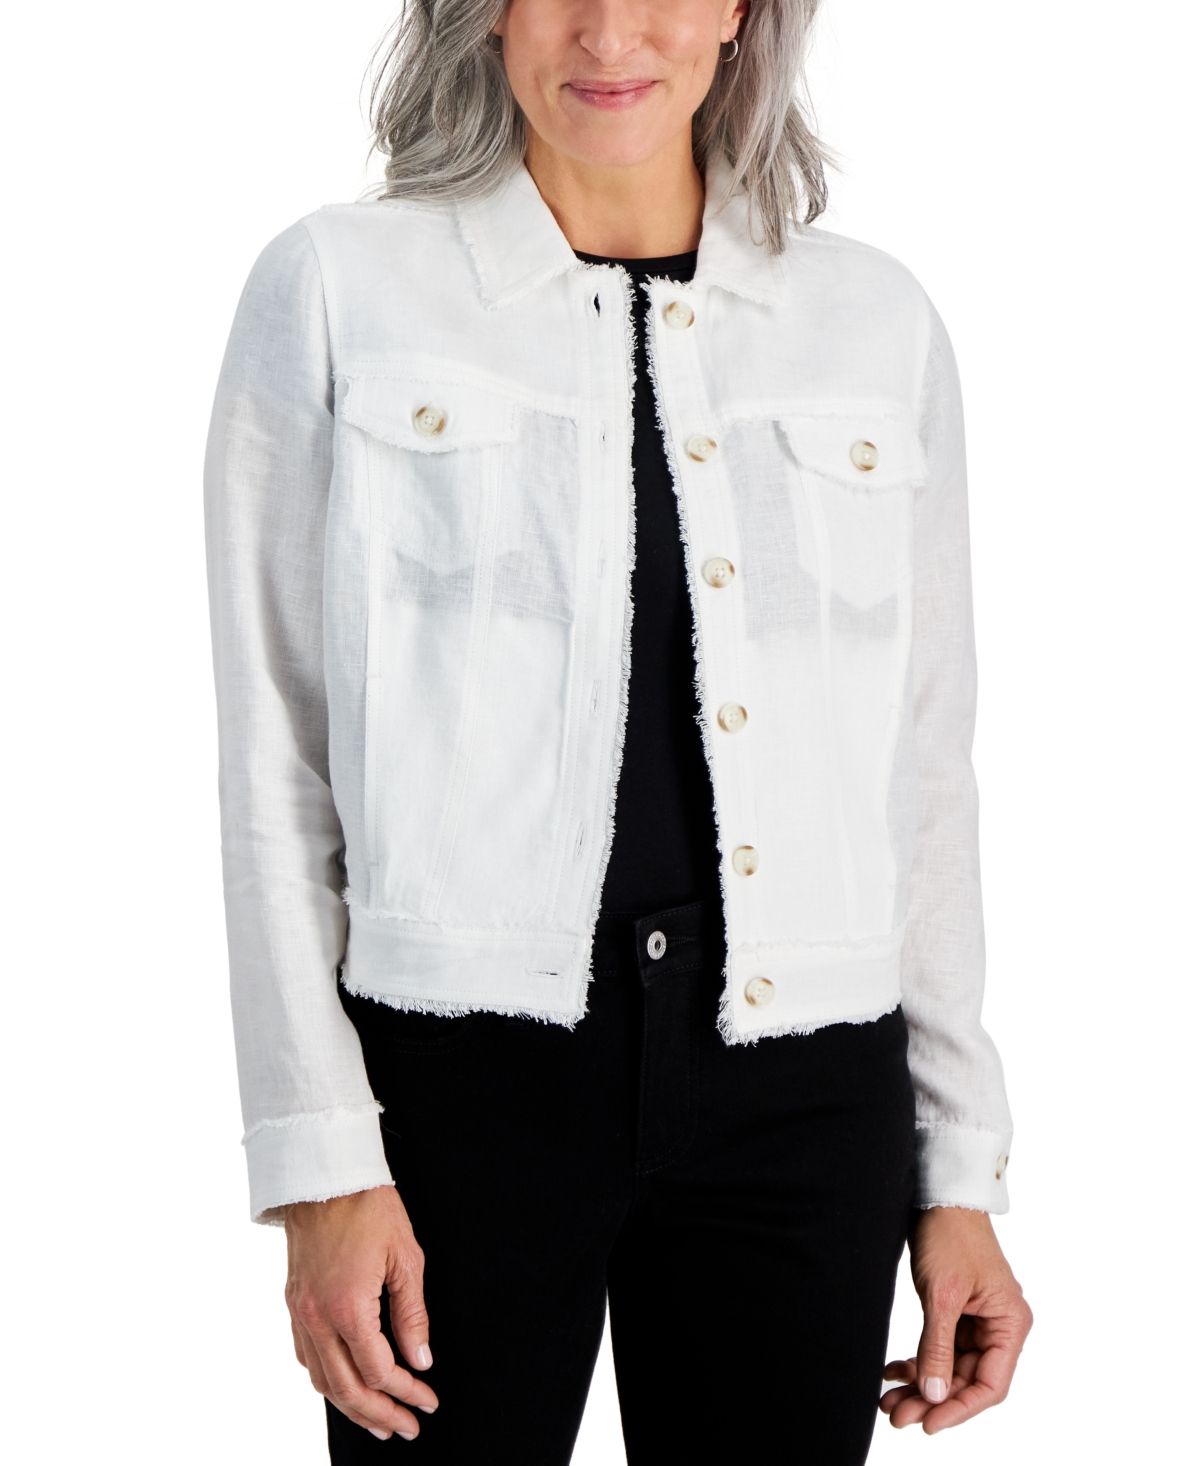 Petite 100% Linen Frayed-Edge Jacket, Created for Macy's - Bright White